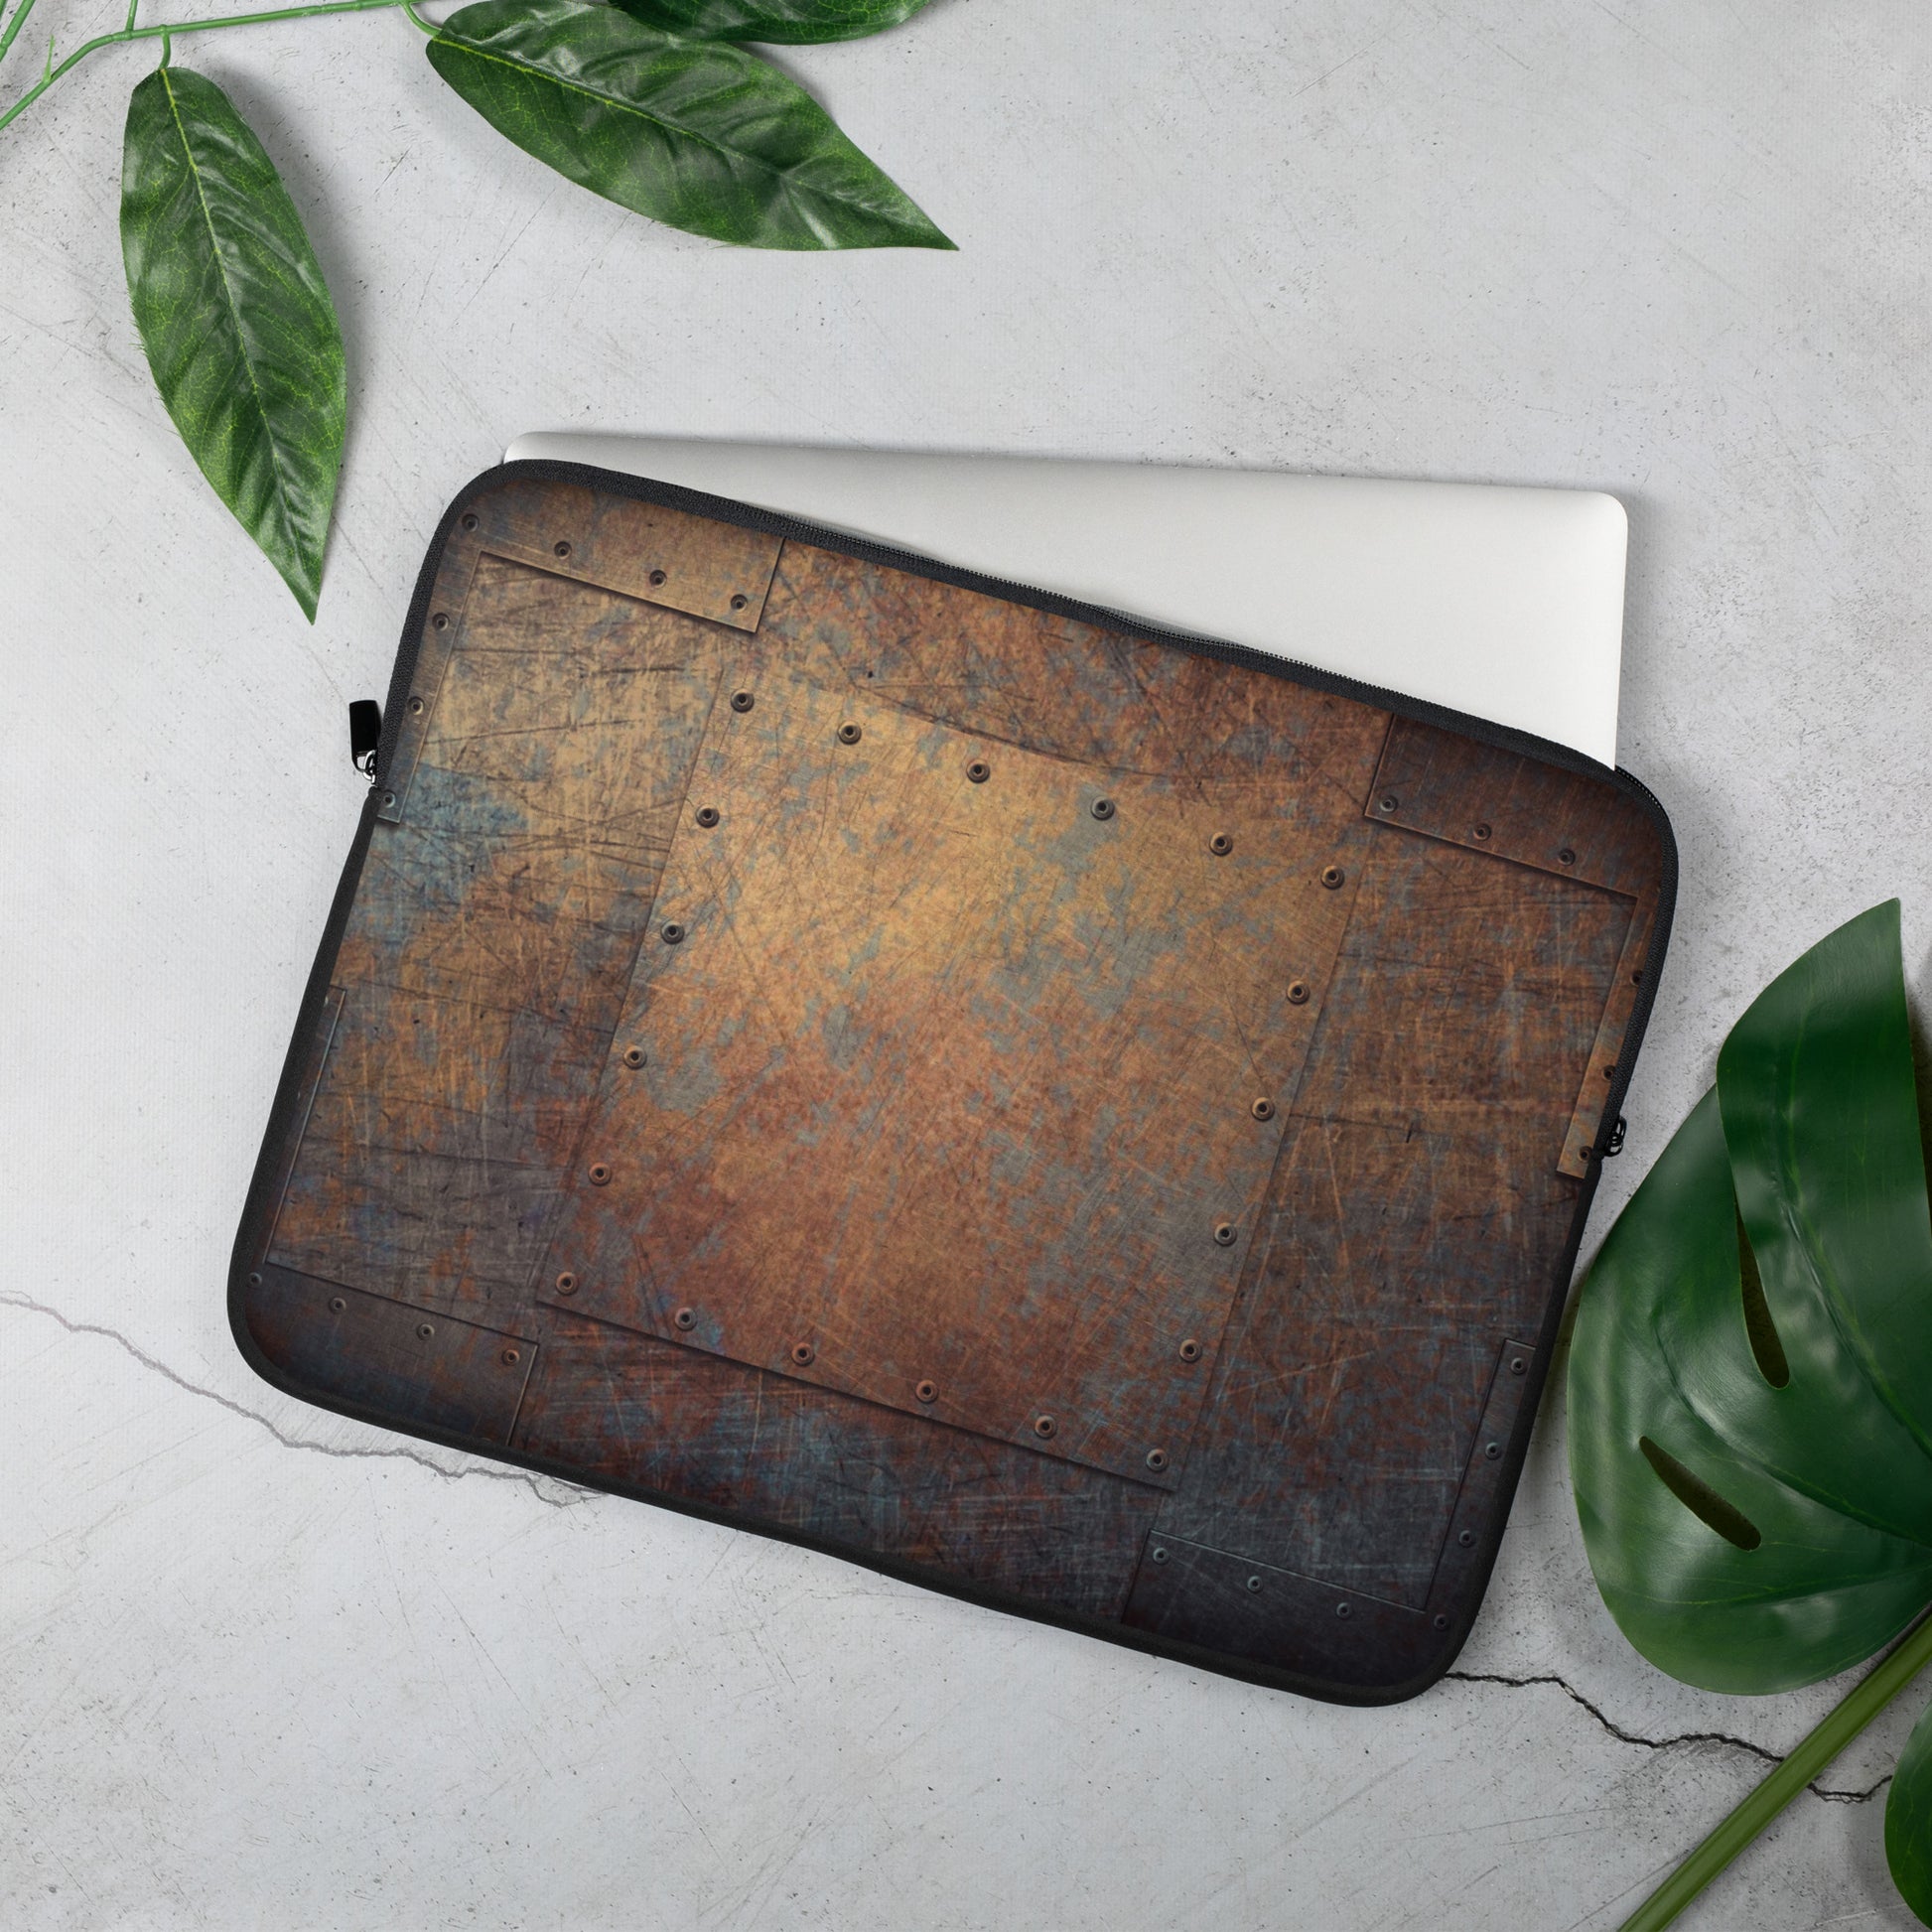 Steampunk, Industrial Themed Laptop Sleeve - Patinated, Weather Beaten, Riveted Copper Sheets Print 15 inches